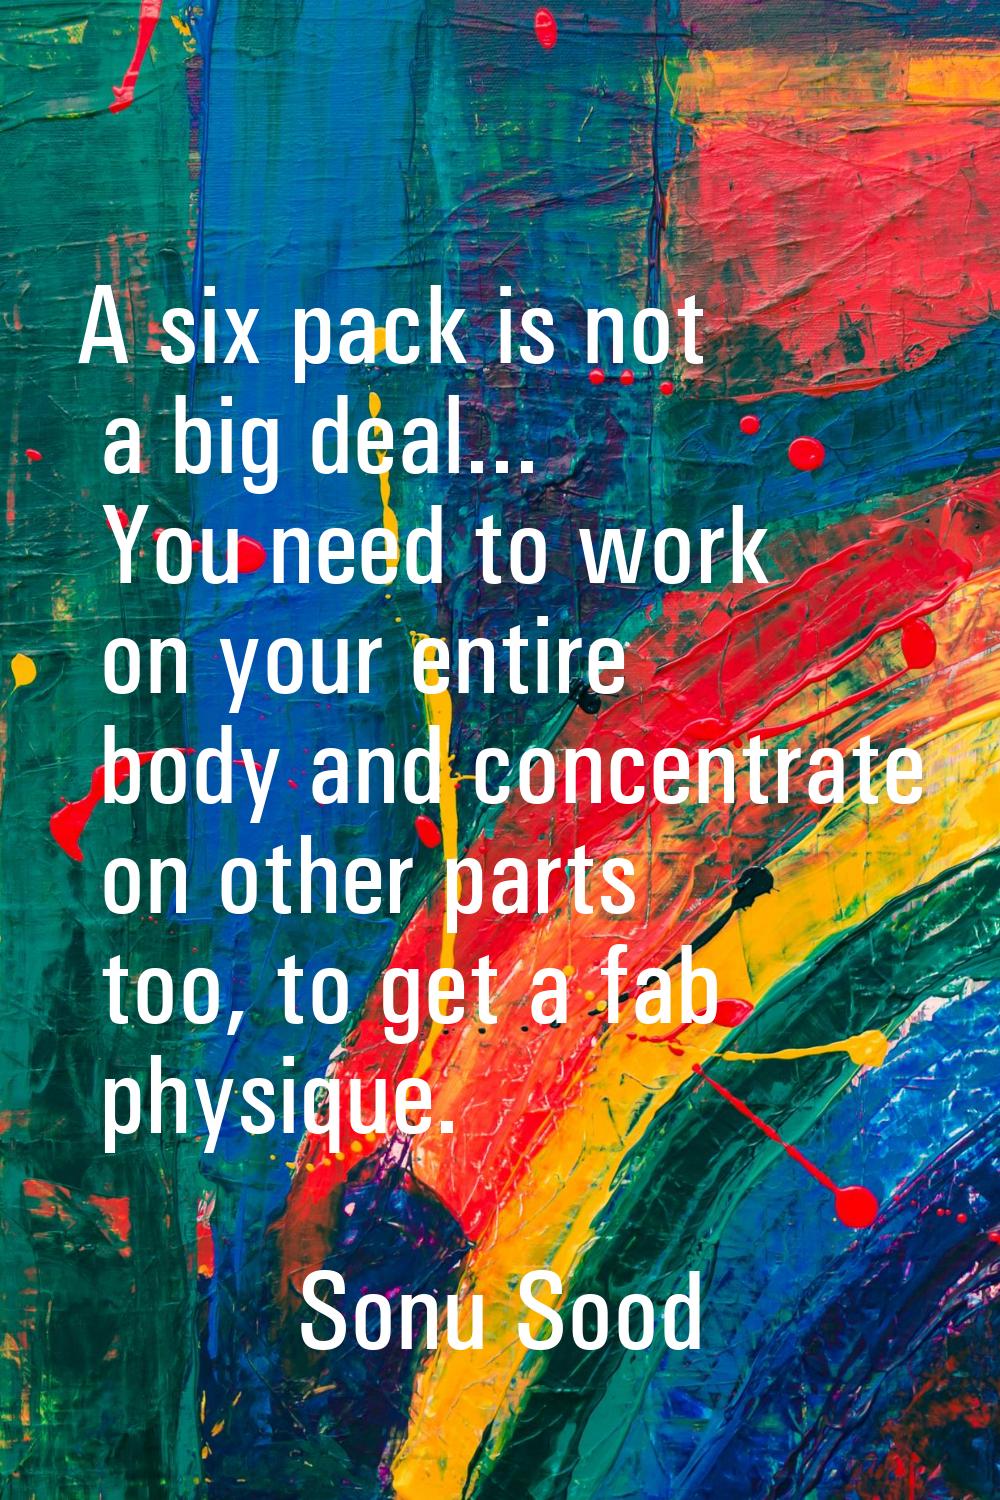 A six pack is not a big deal... You need to work on your entire body and concentrate on other parts